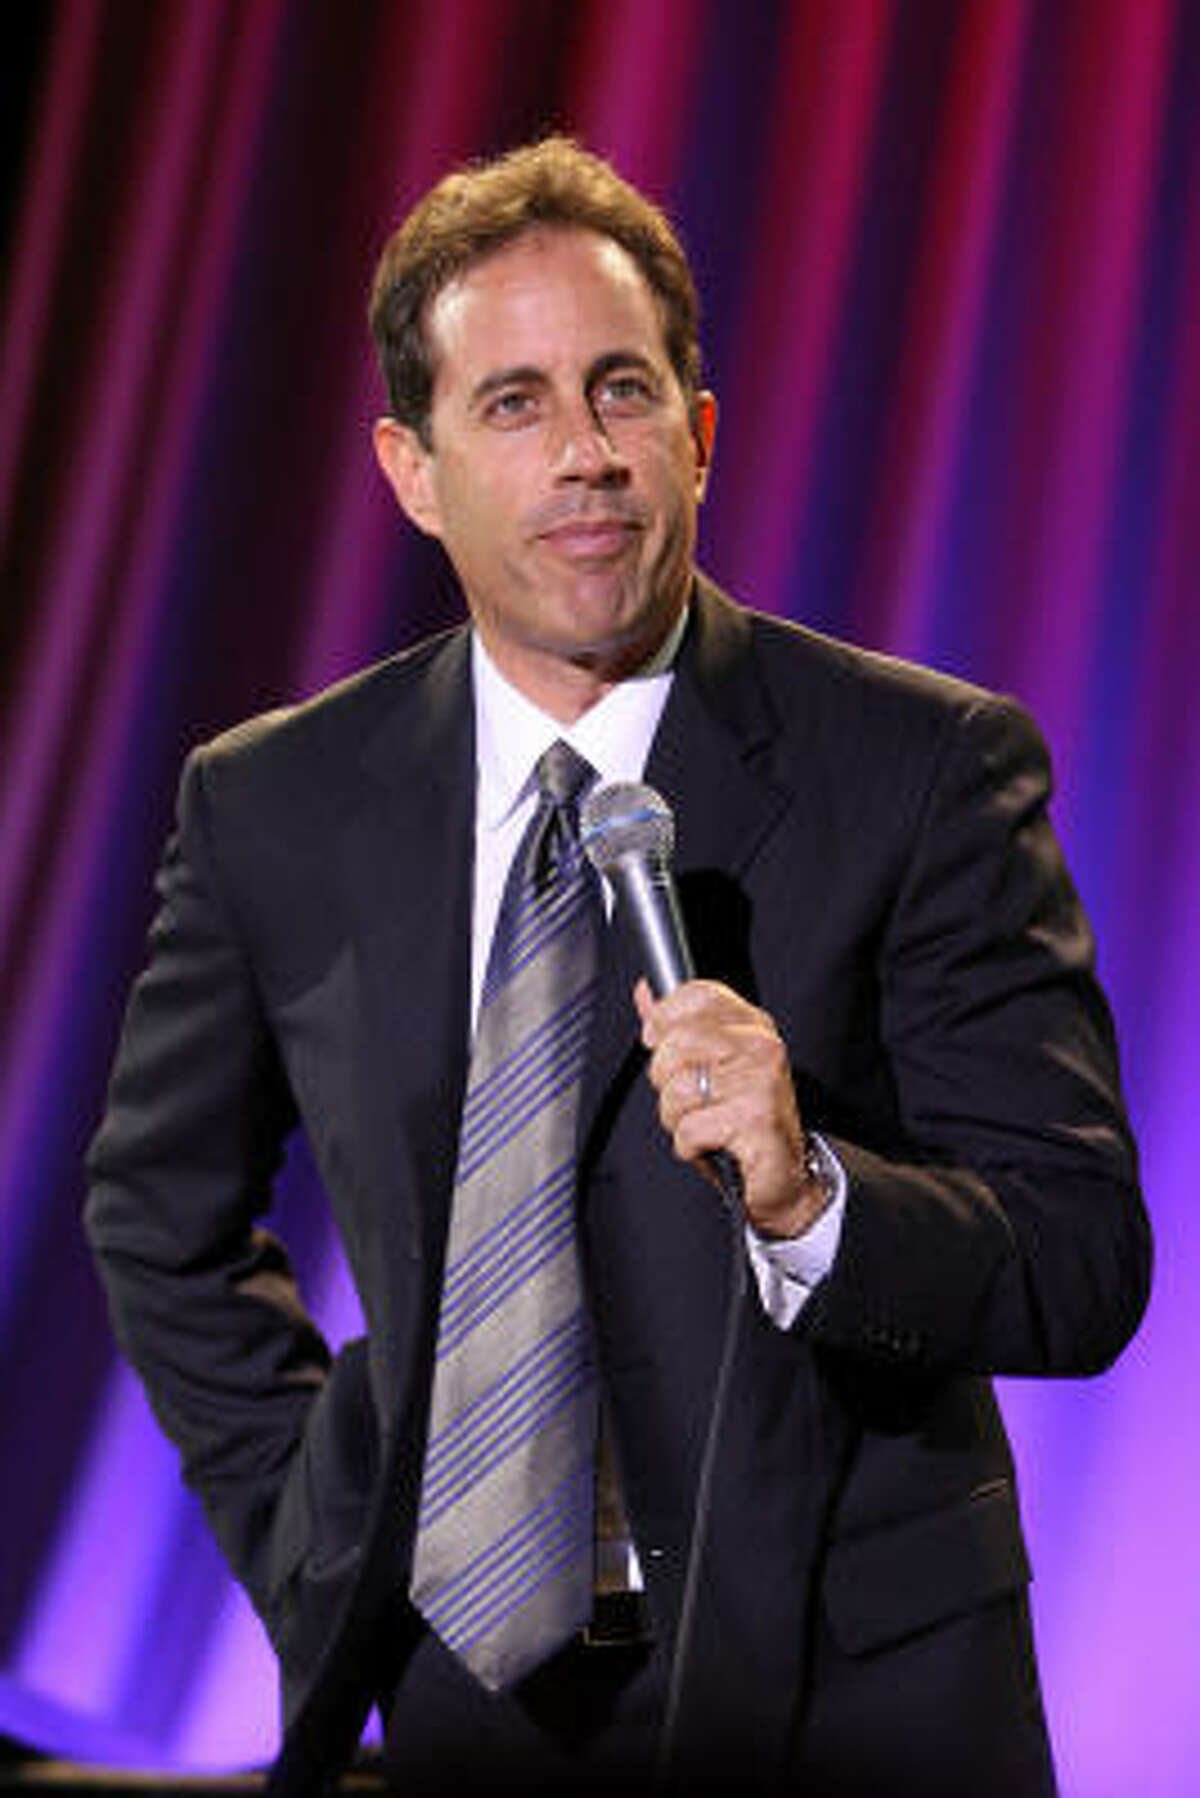 Unlike his TV show, Jerry Seinfeld’s stand-up comedy isn’t really about nothing. Or is it? Judge for yourself. Until he gets a hankering to do TV again, his Houston show and syndicated TV are the only ways to see him. 9 p.m. Friday at Jones Hall, 615 Louisiana. Tickets are $45-$75; 713-629-3700 or www.ticketmaster.com.